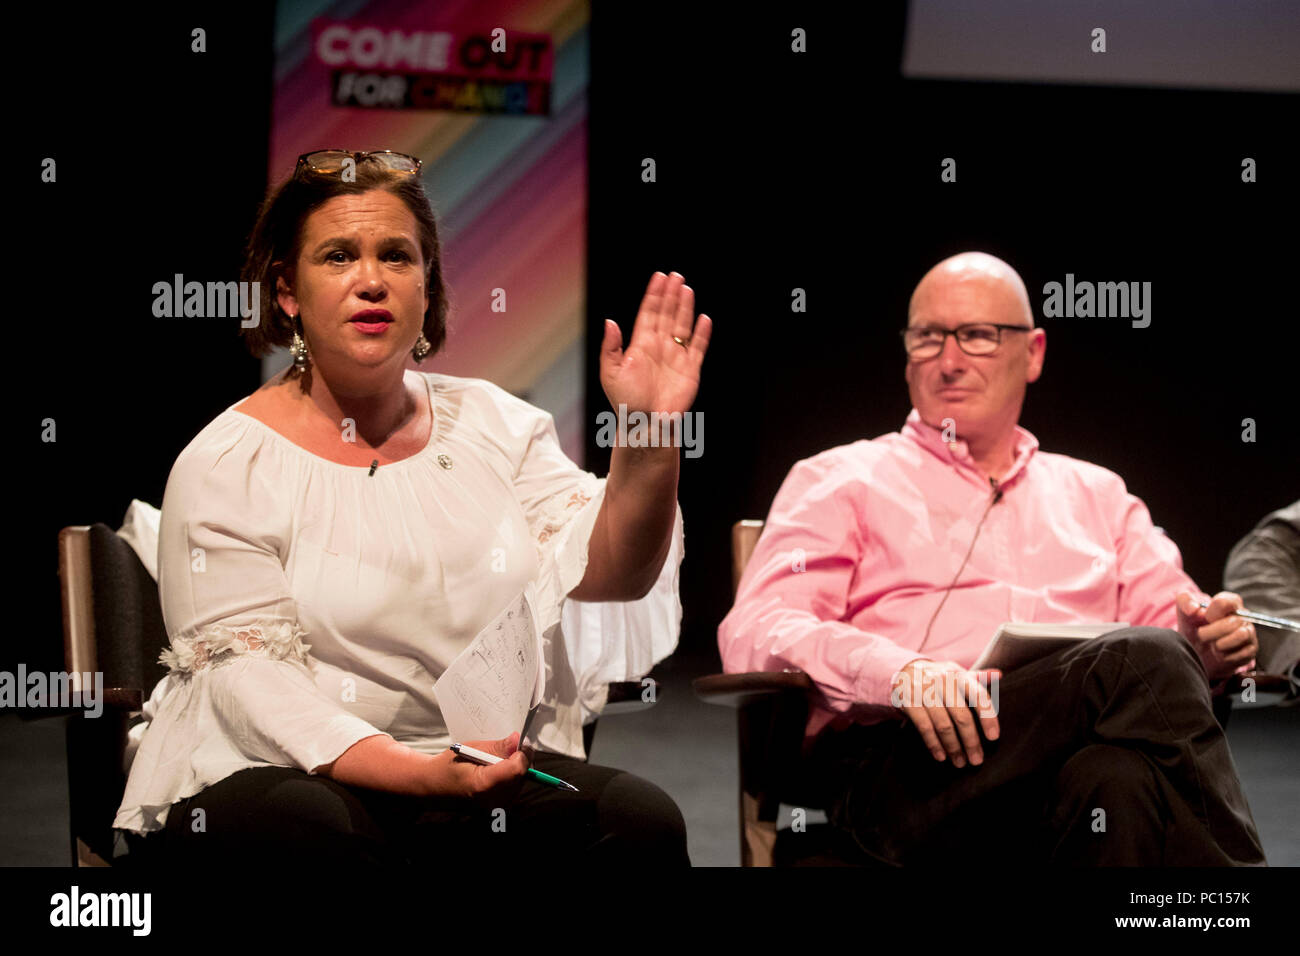 Sinn Fein President Mary Lou McDonald speaking as leader of the PUP Billy Hutchinson looks on, during the Belfast Pride political debate at The Mac Theatre in Belfast to address a wide range of equality issues in Northern Ireland at part of the 2018 Belfast Pride Festival. Stock Photo